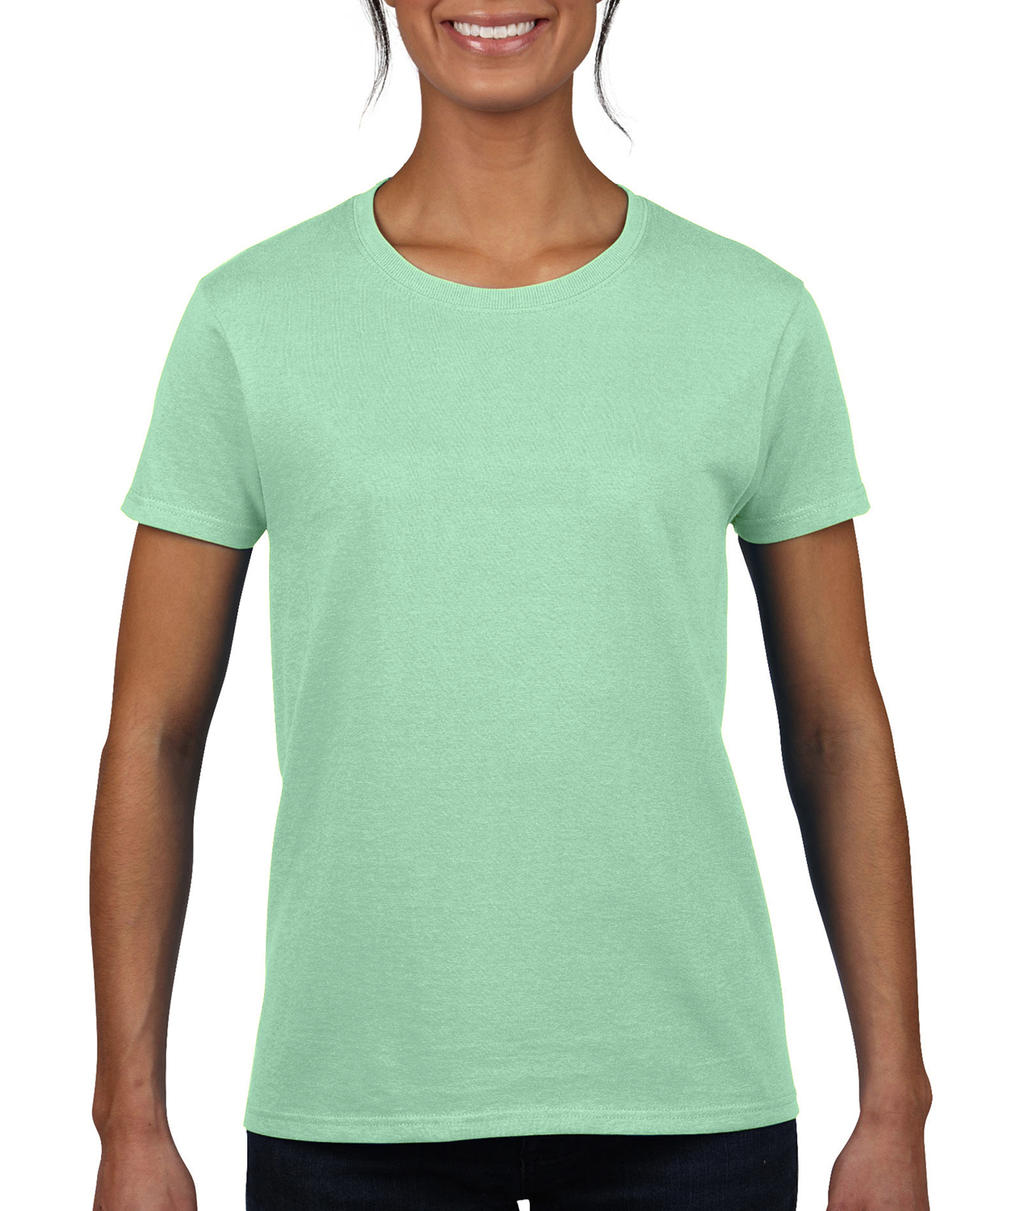  Ladies Heavy Cotton T-Shirt in Farbe Mint Green